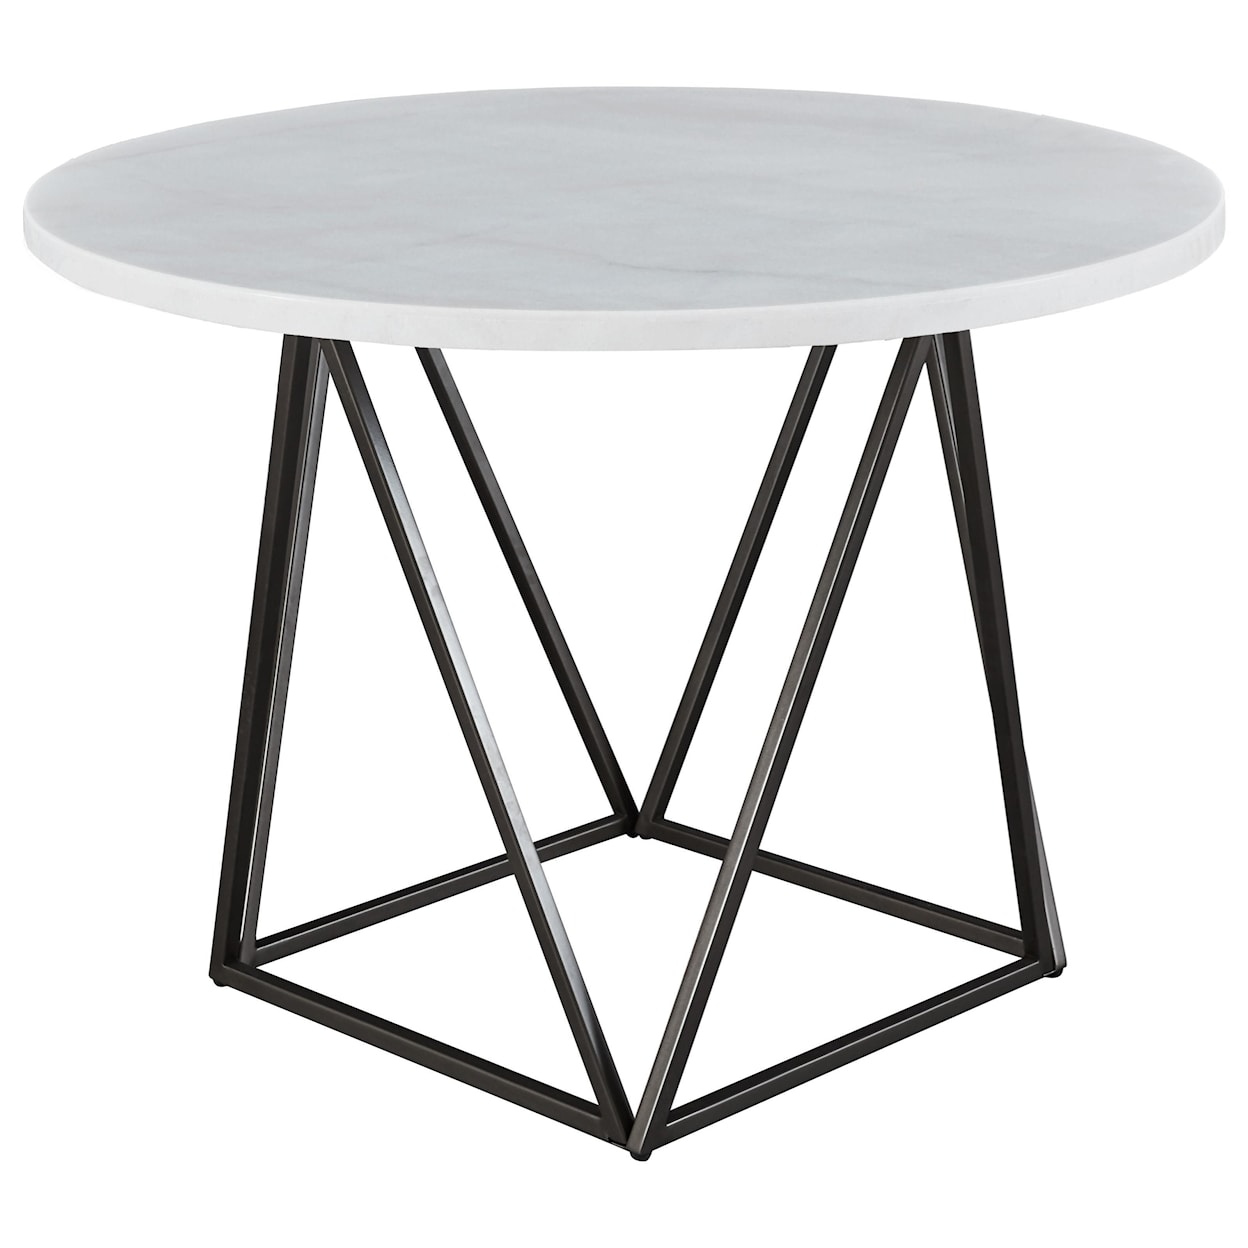 Steve Silver Ramona White Marble Top Round Dining Table